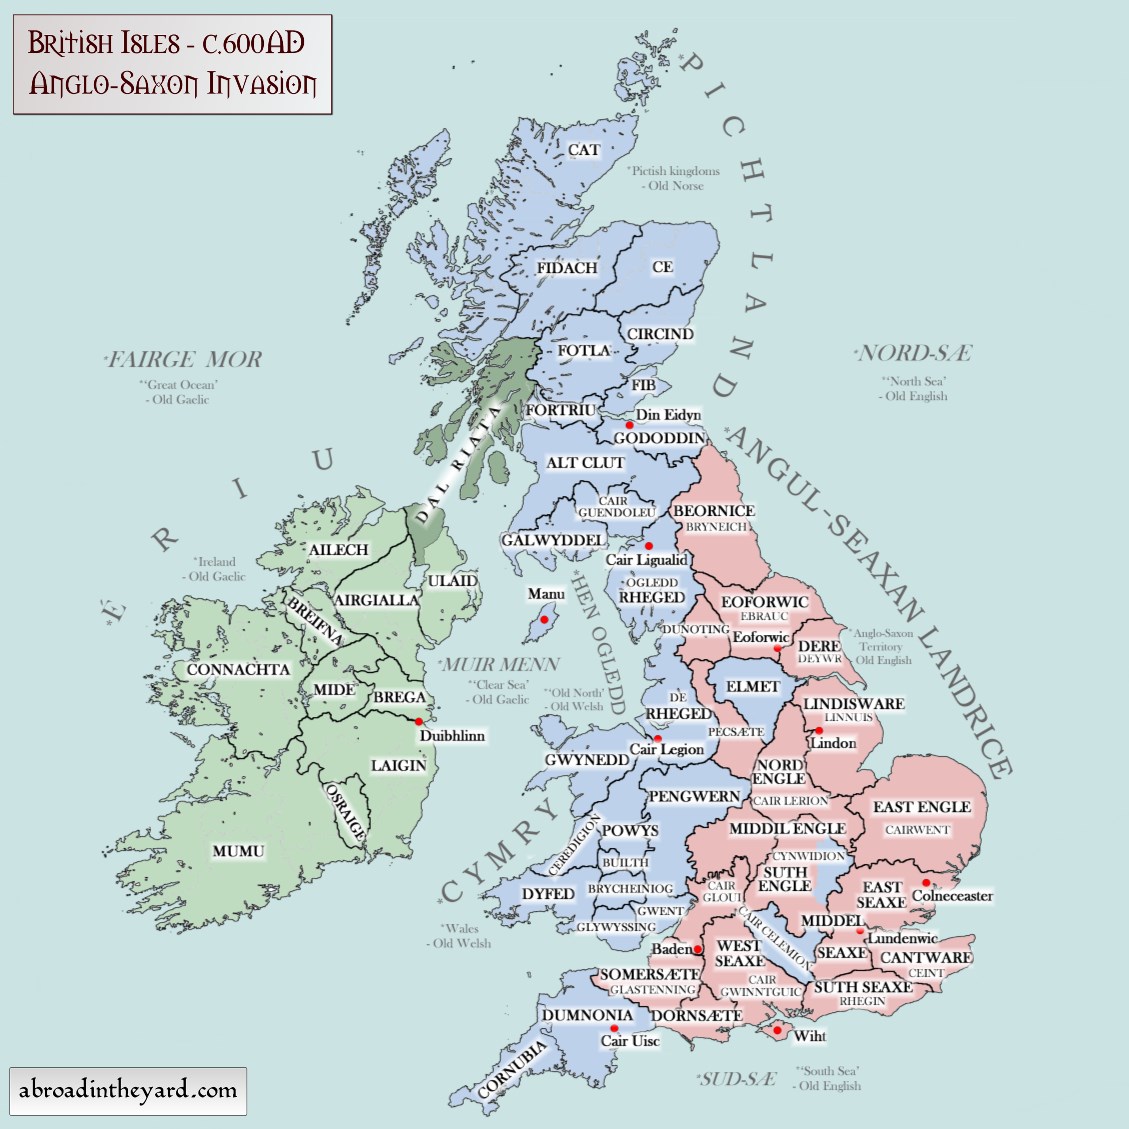 The invading Anglo-Saxons pushed the Celts to the west of Britain, in what became an annexed land we now, somewhat ironically, call "Wales." Worse still, Walha(z) took on the meaning not just of foreigner but of 'the other' in Old English, and even 'slave.'